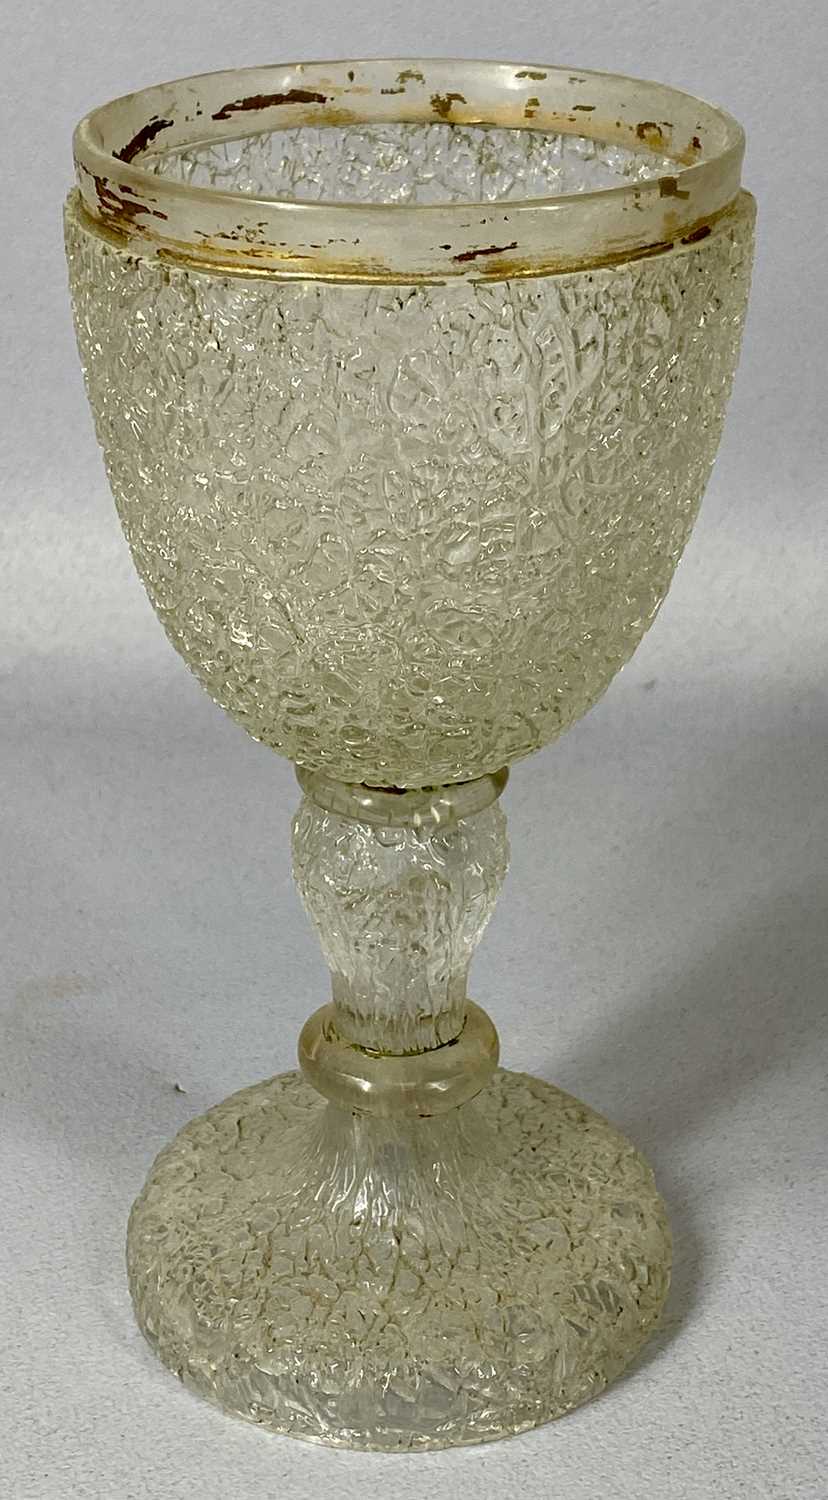 HARRACH TYPE CRACKLE GLASSWARE, three pieces - pitcher, 26cms (h), goblet, 19.5cms (h) and - Image 3 of 4